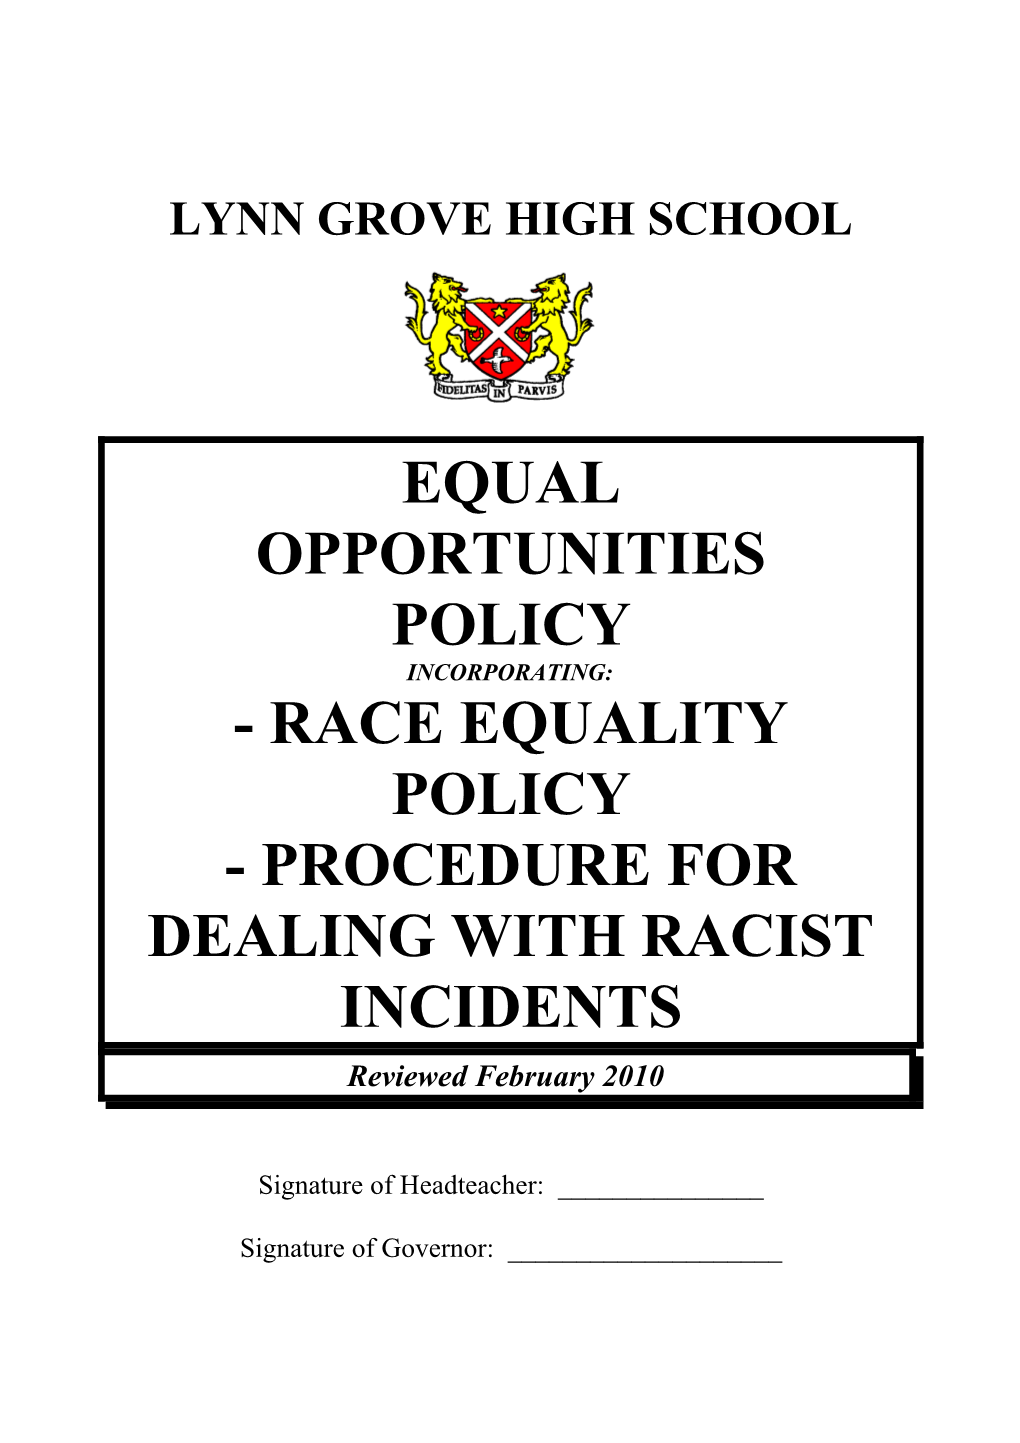 Procedure for Dealing with Racist Incidents